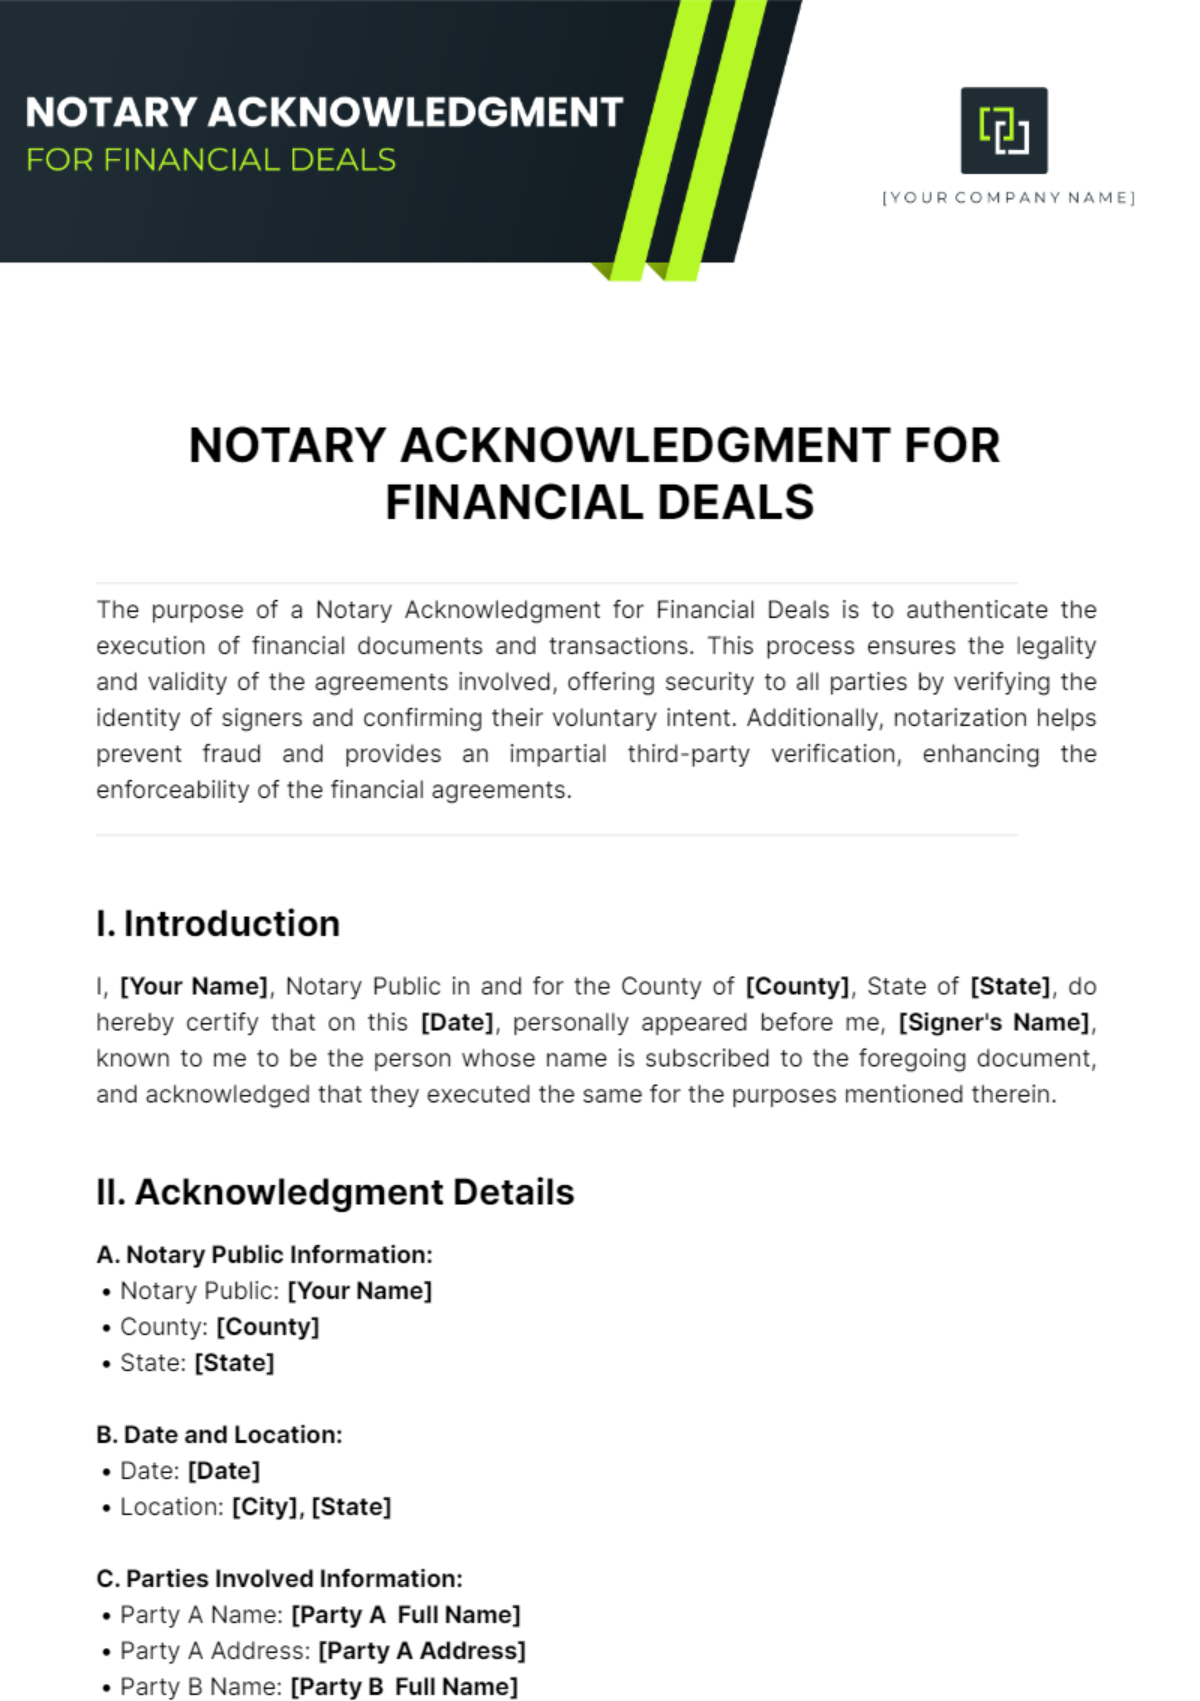 Notary Acknowledgment For Financial Deals Template